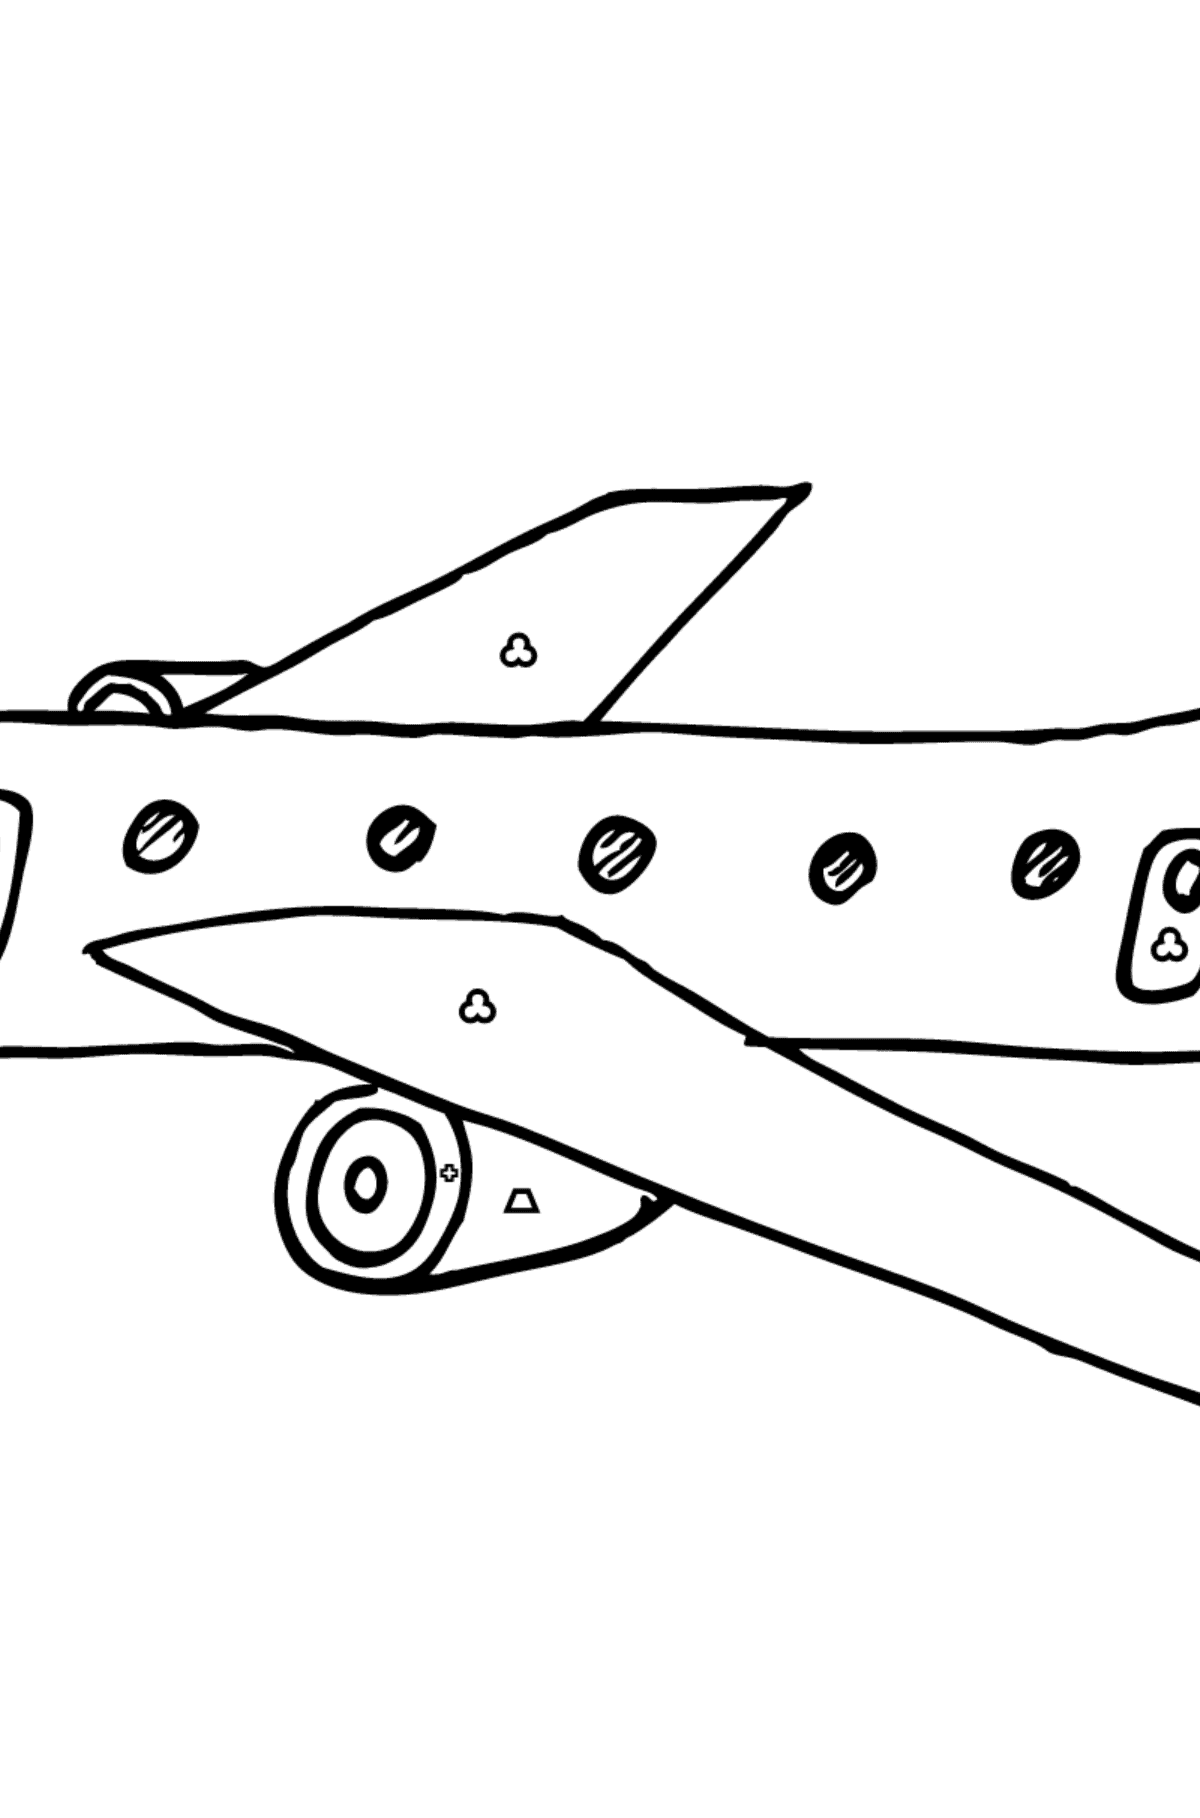 Coloring Page - A Commercial Jet - Coloring by Geometric Shapes for Kids